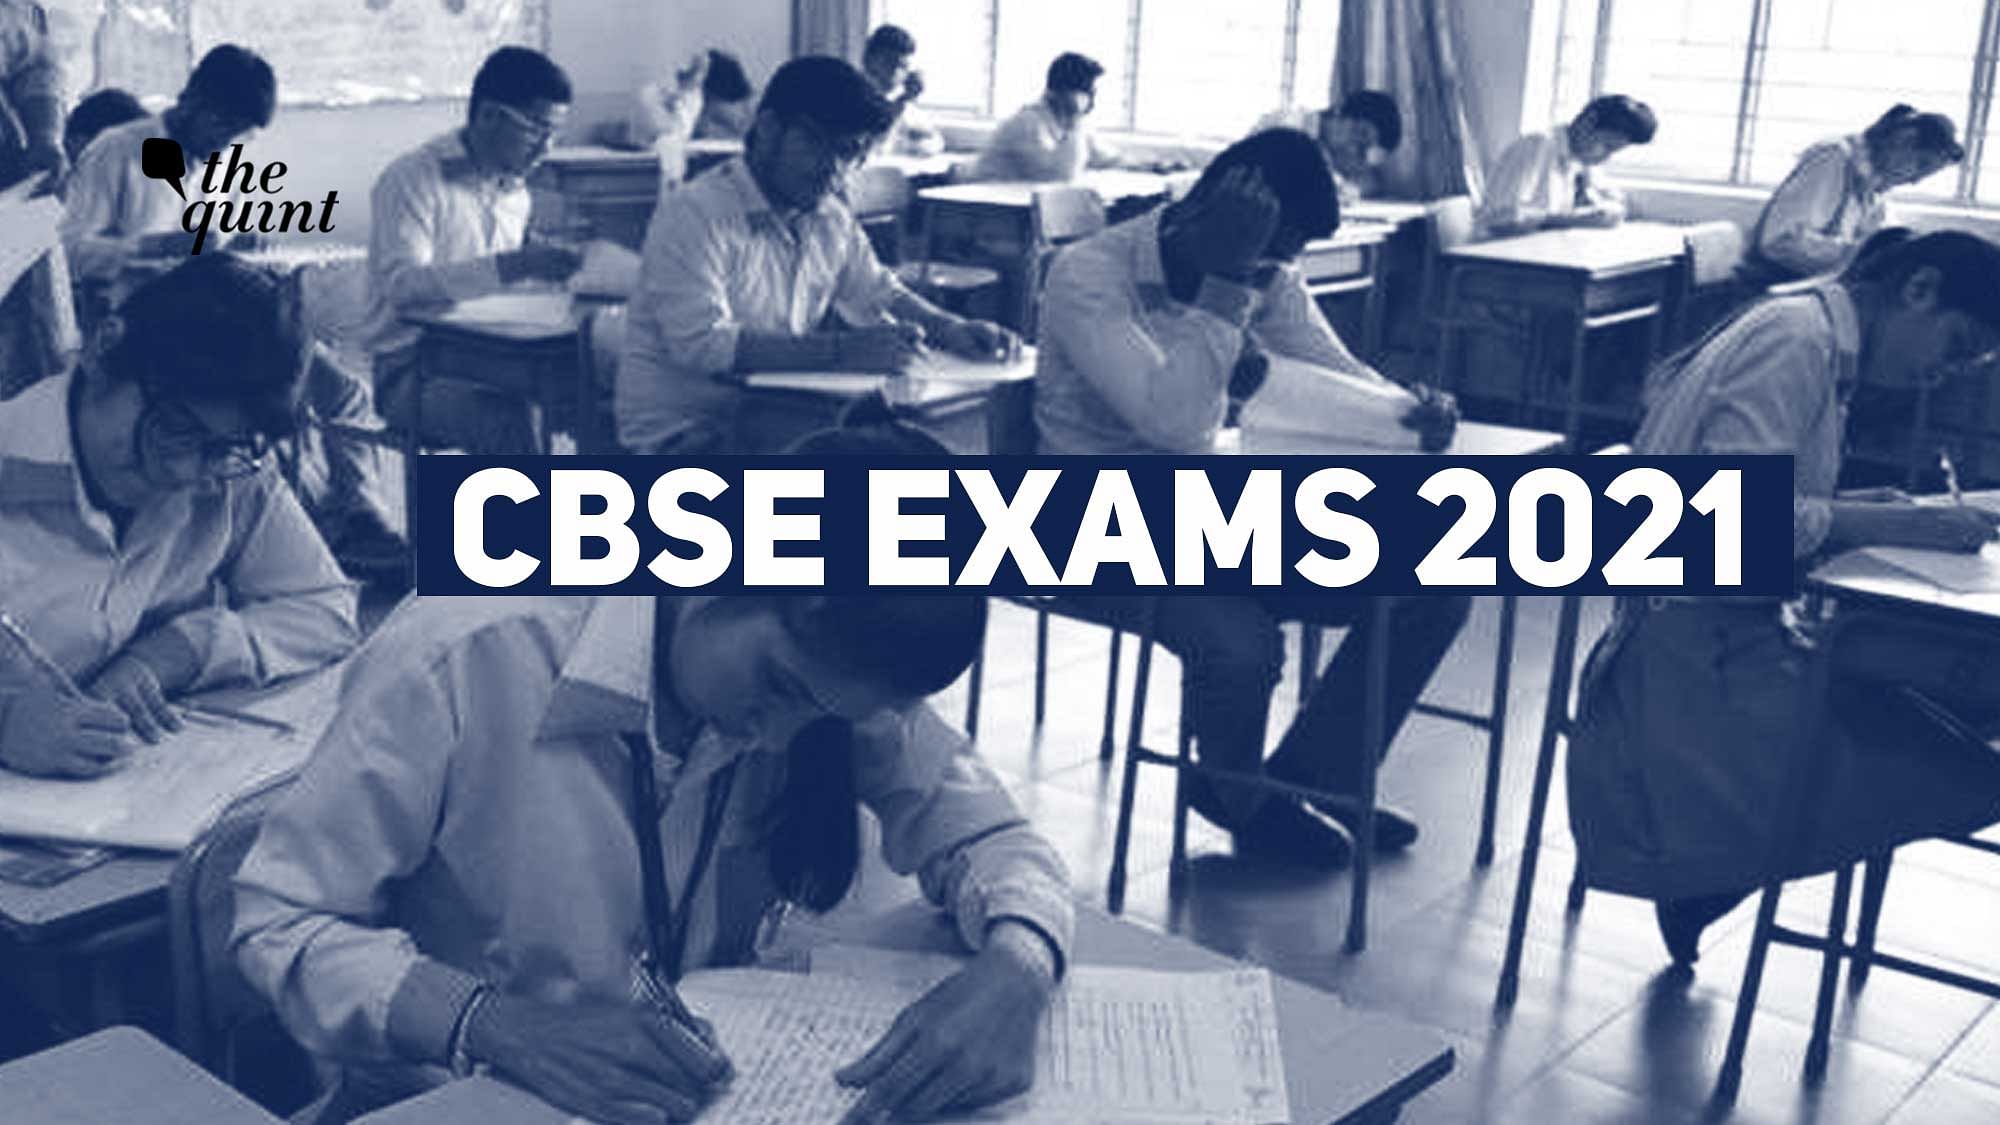 The Supreme Court on Thursday, 17 June, approved the assessment plans submitted by the Central Board of Secondary Education (CBSE) and the Council for the Indian School Certificate Examinations (CISCE) for evaluation of Class 12 students.